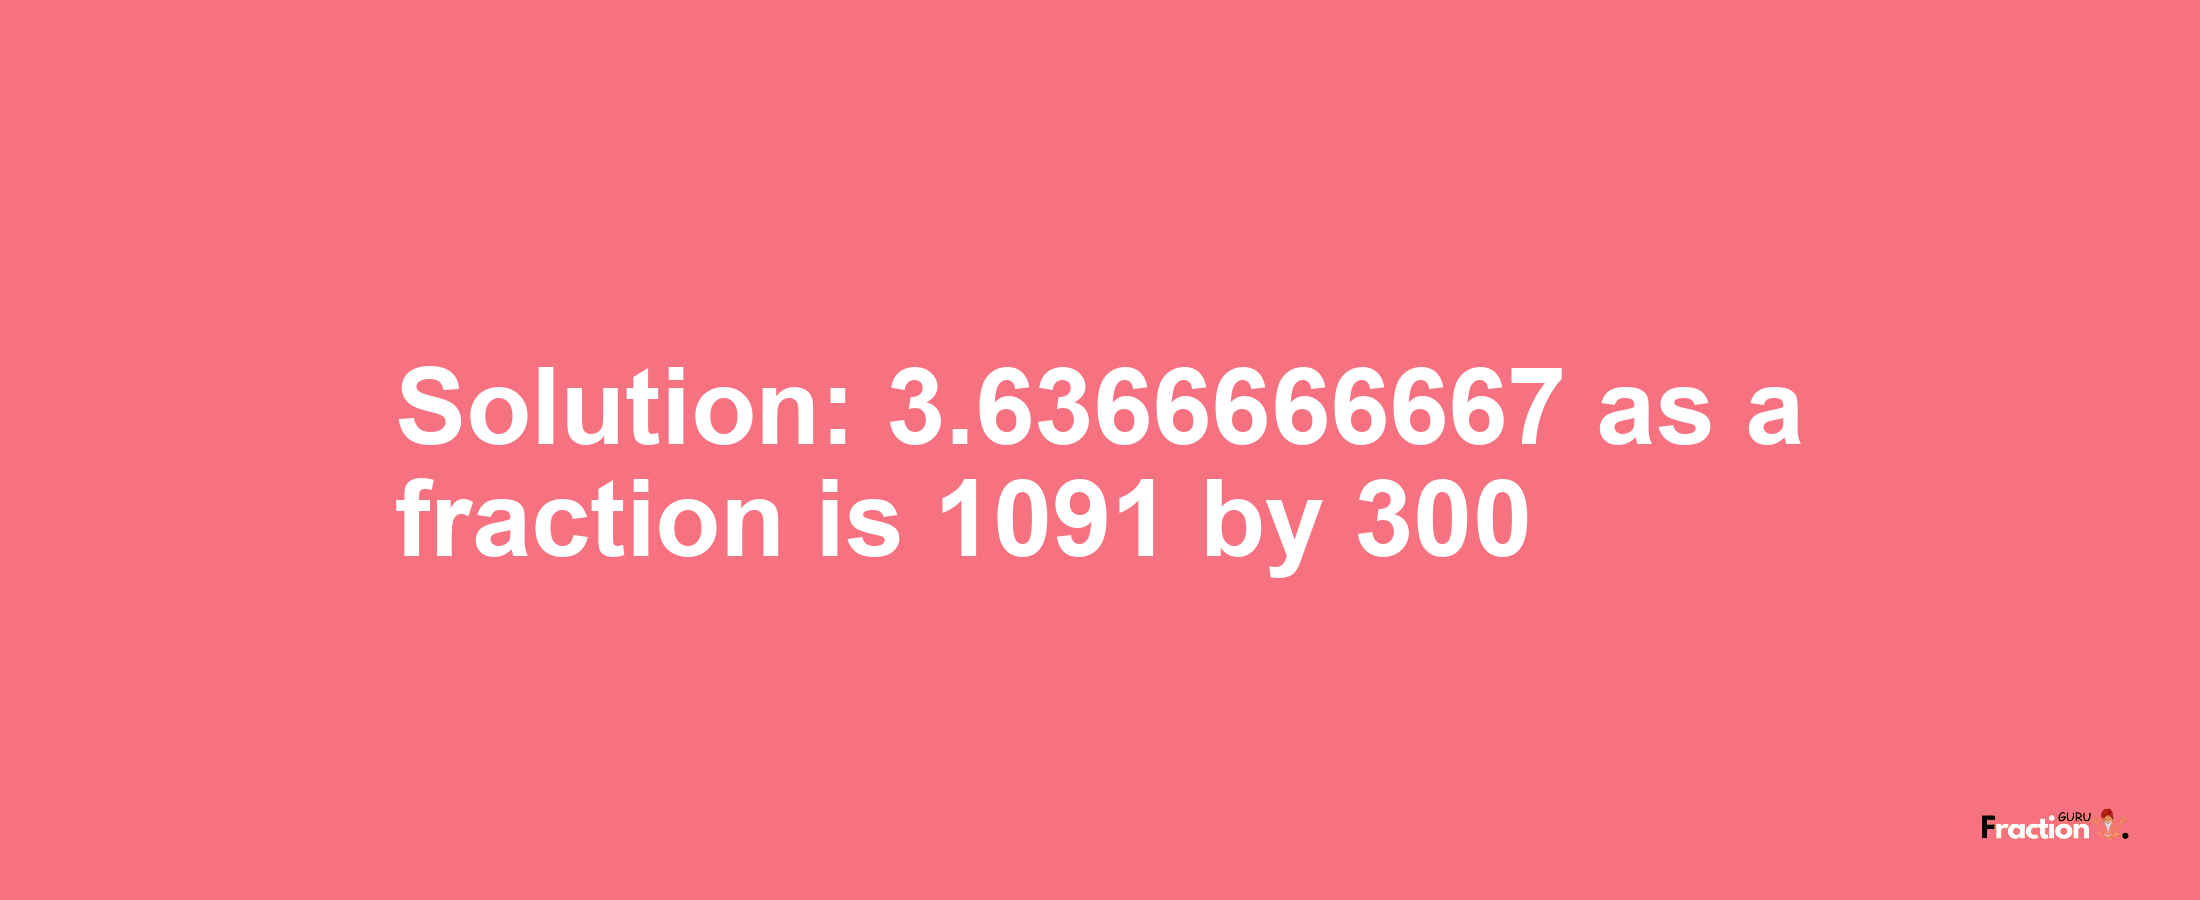 Solution:3.6366666667 as a fraction is 1091/300